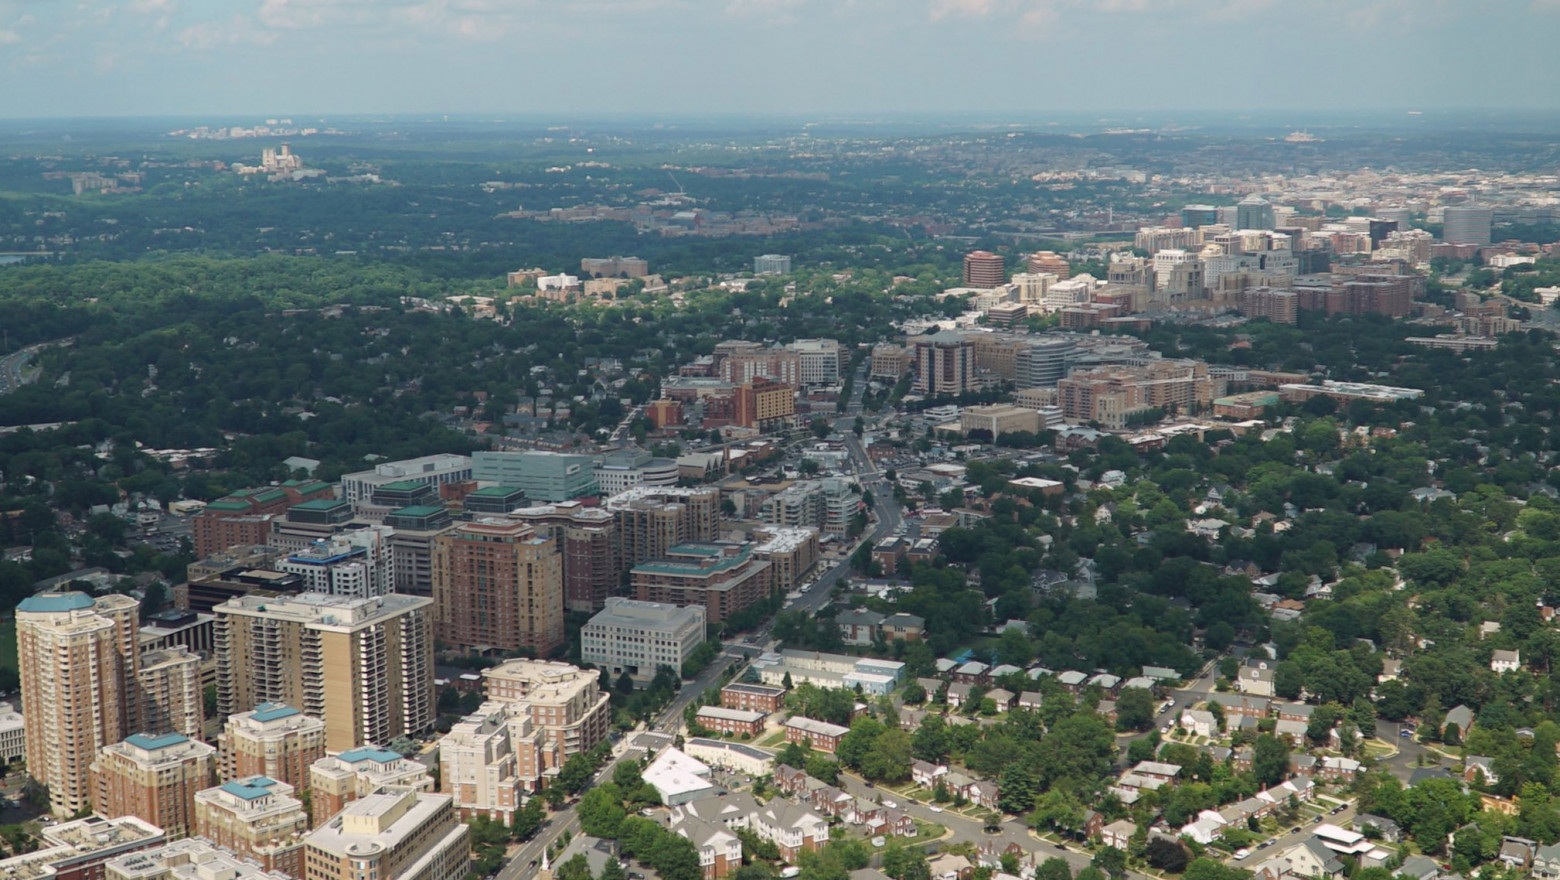 D.C.-area county aims to be net zero by 2050